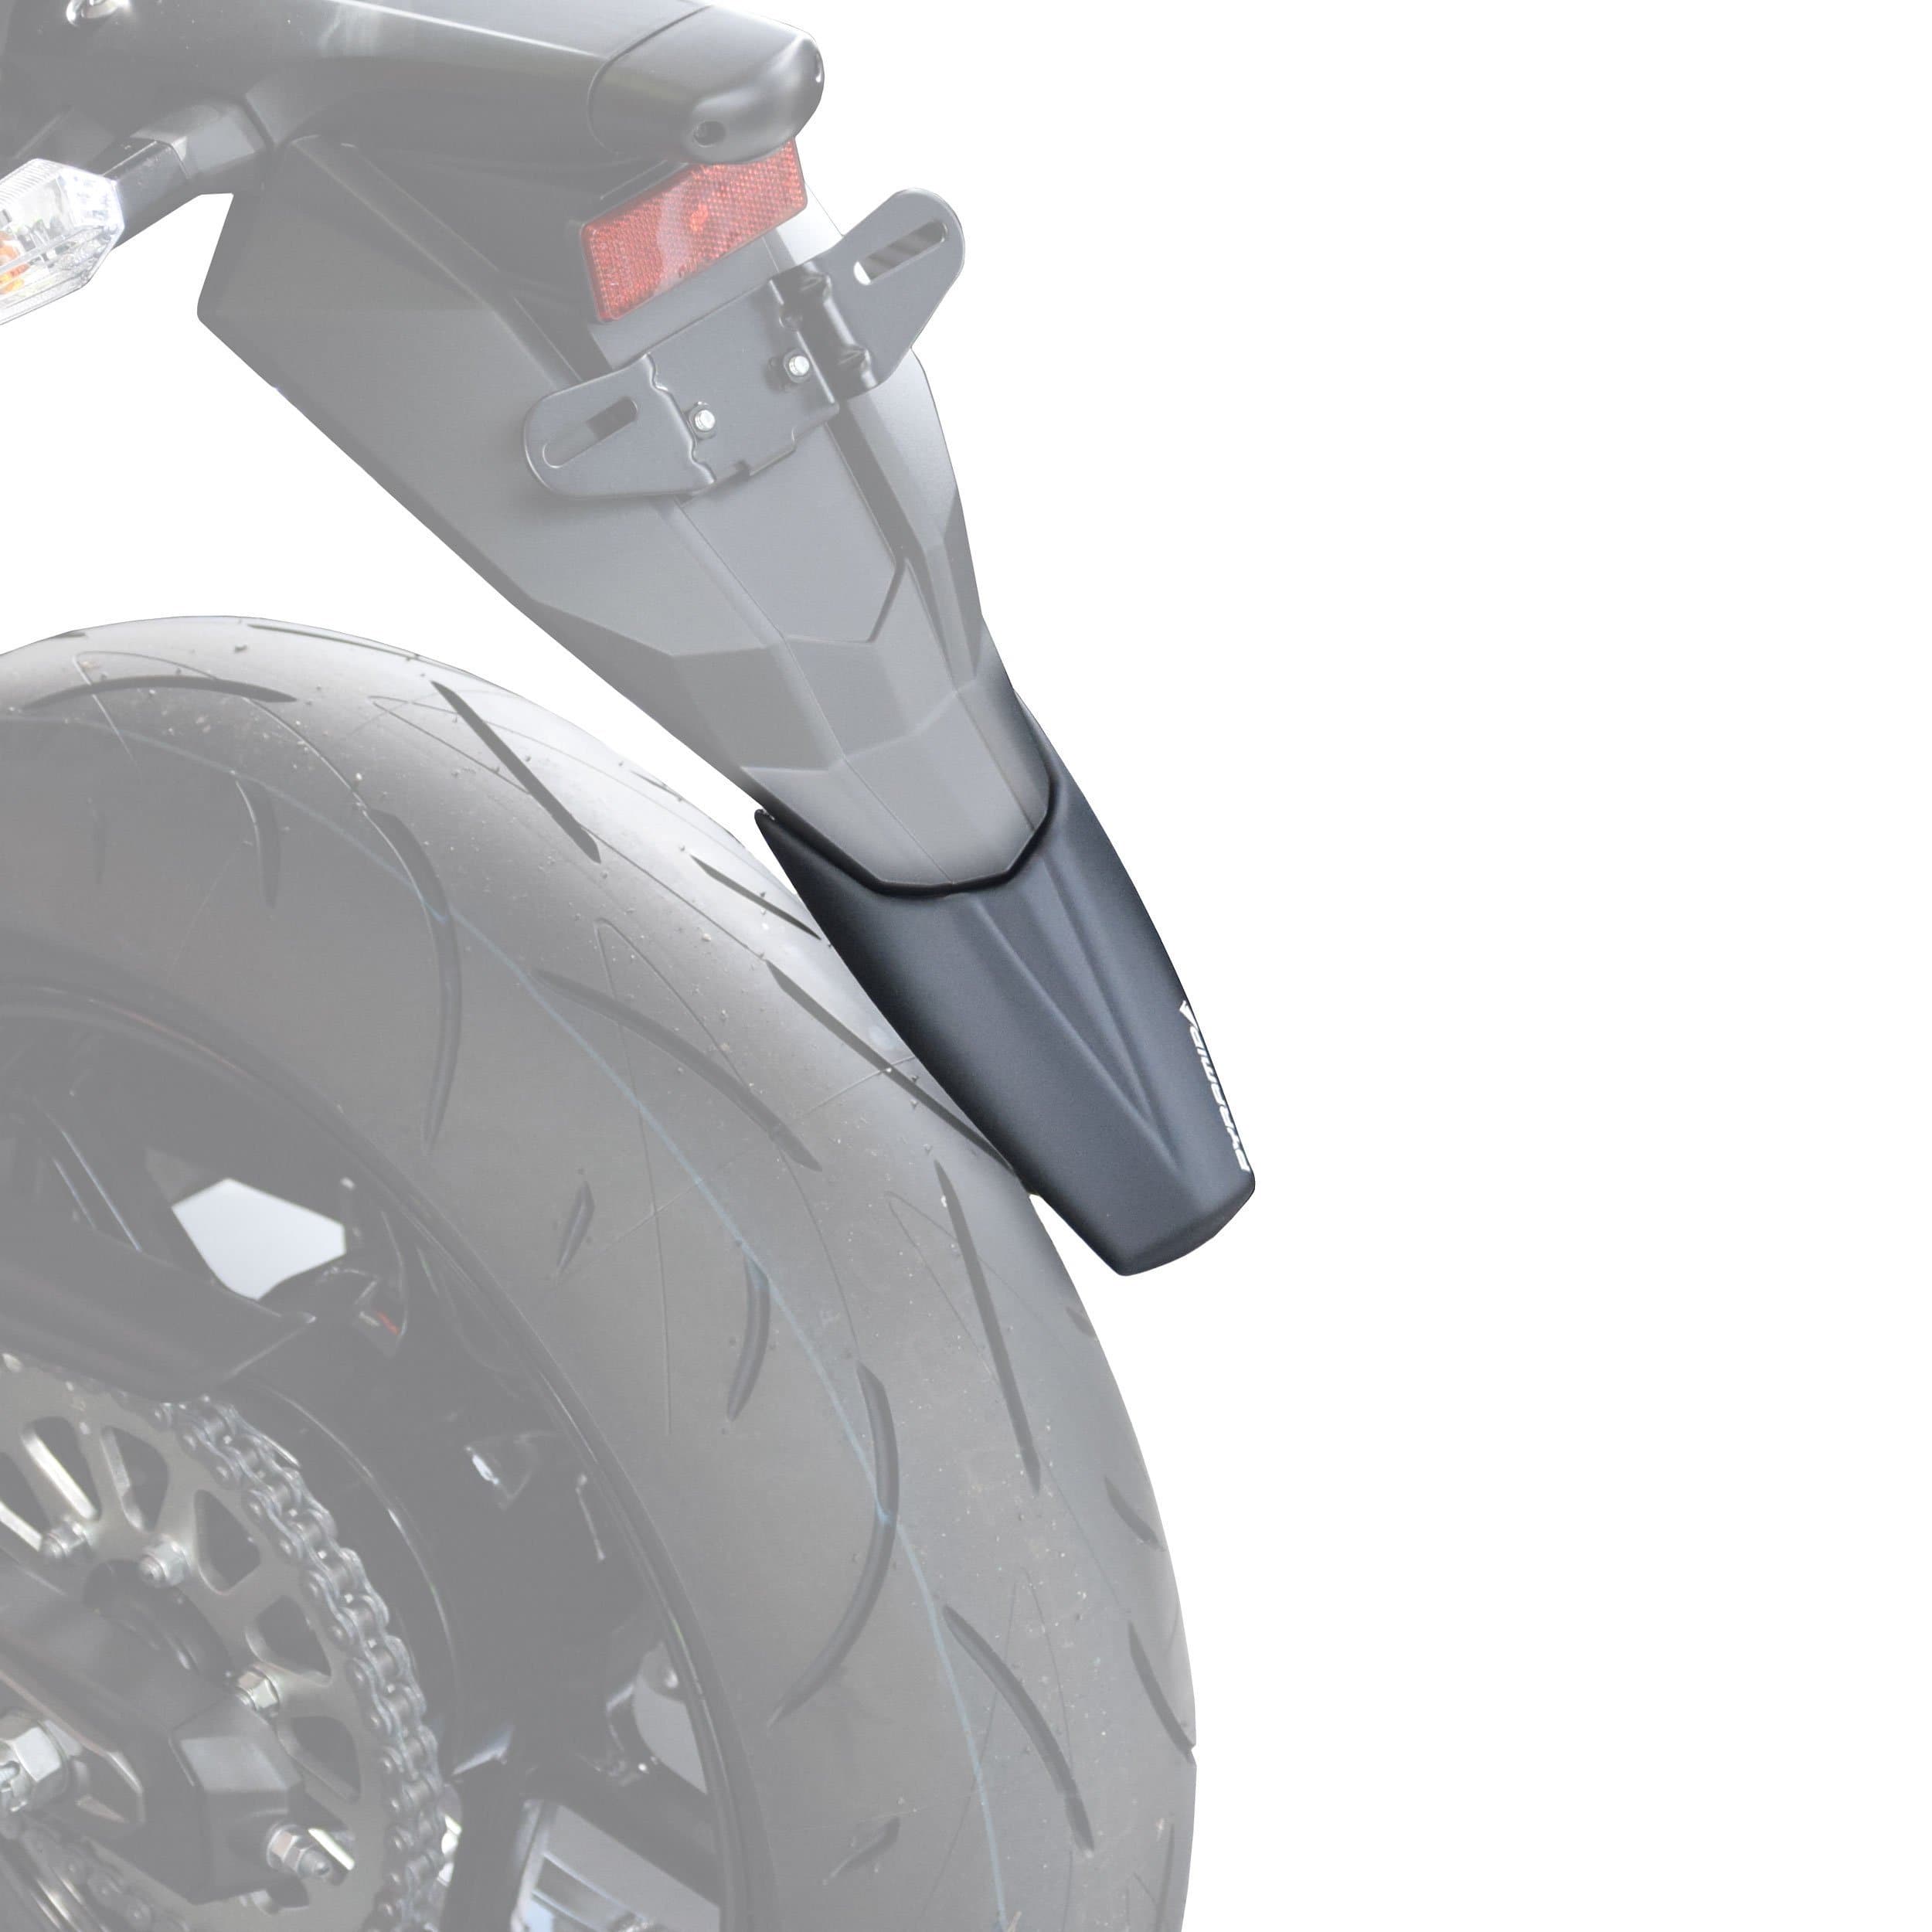 Pyramid Ductail | Matte Black | Kawasaki ER-6F 2012>2016-08115-Ductails-Pyramid Motorcycle Accessories